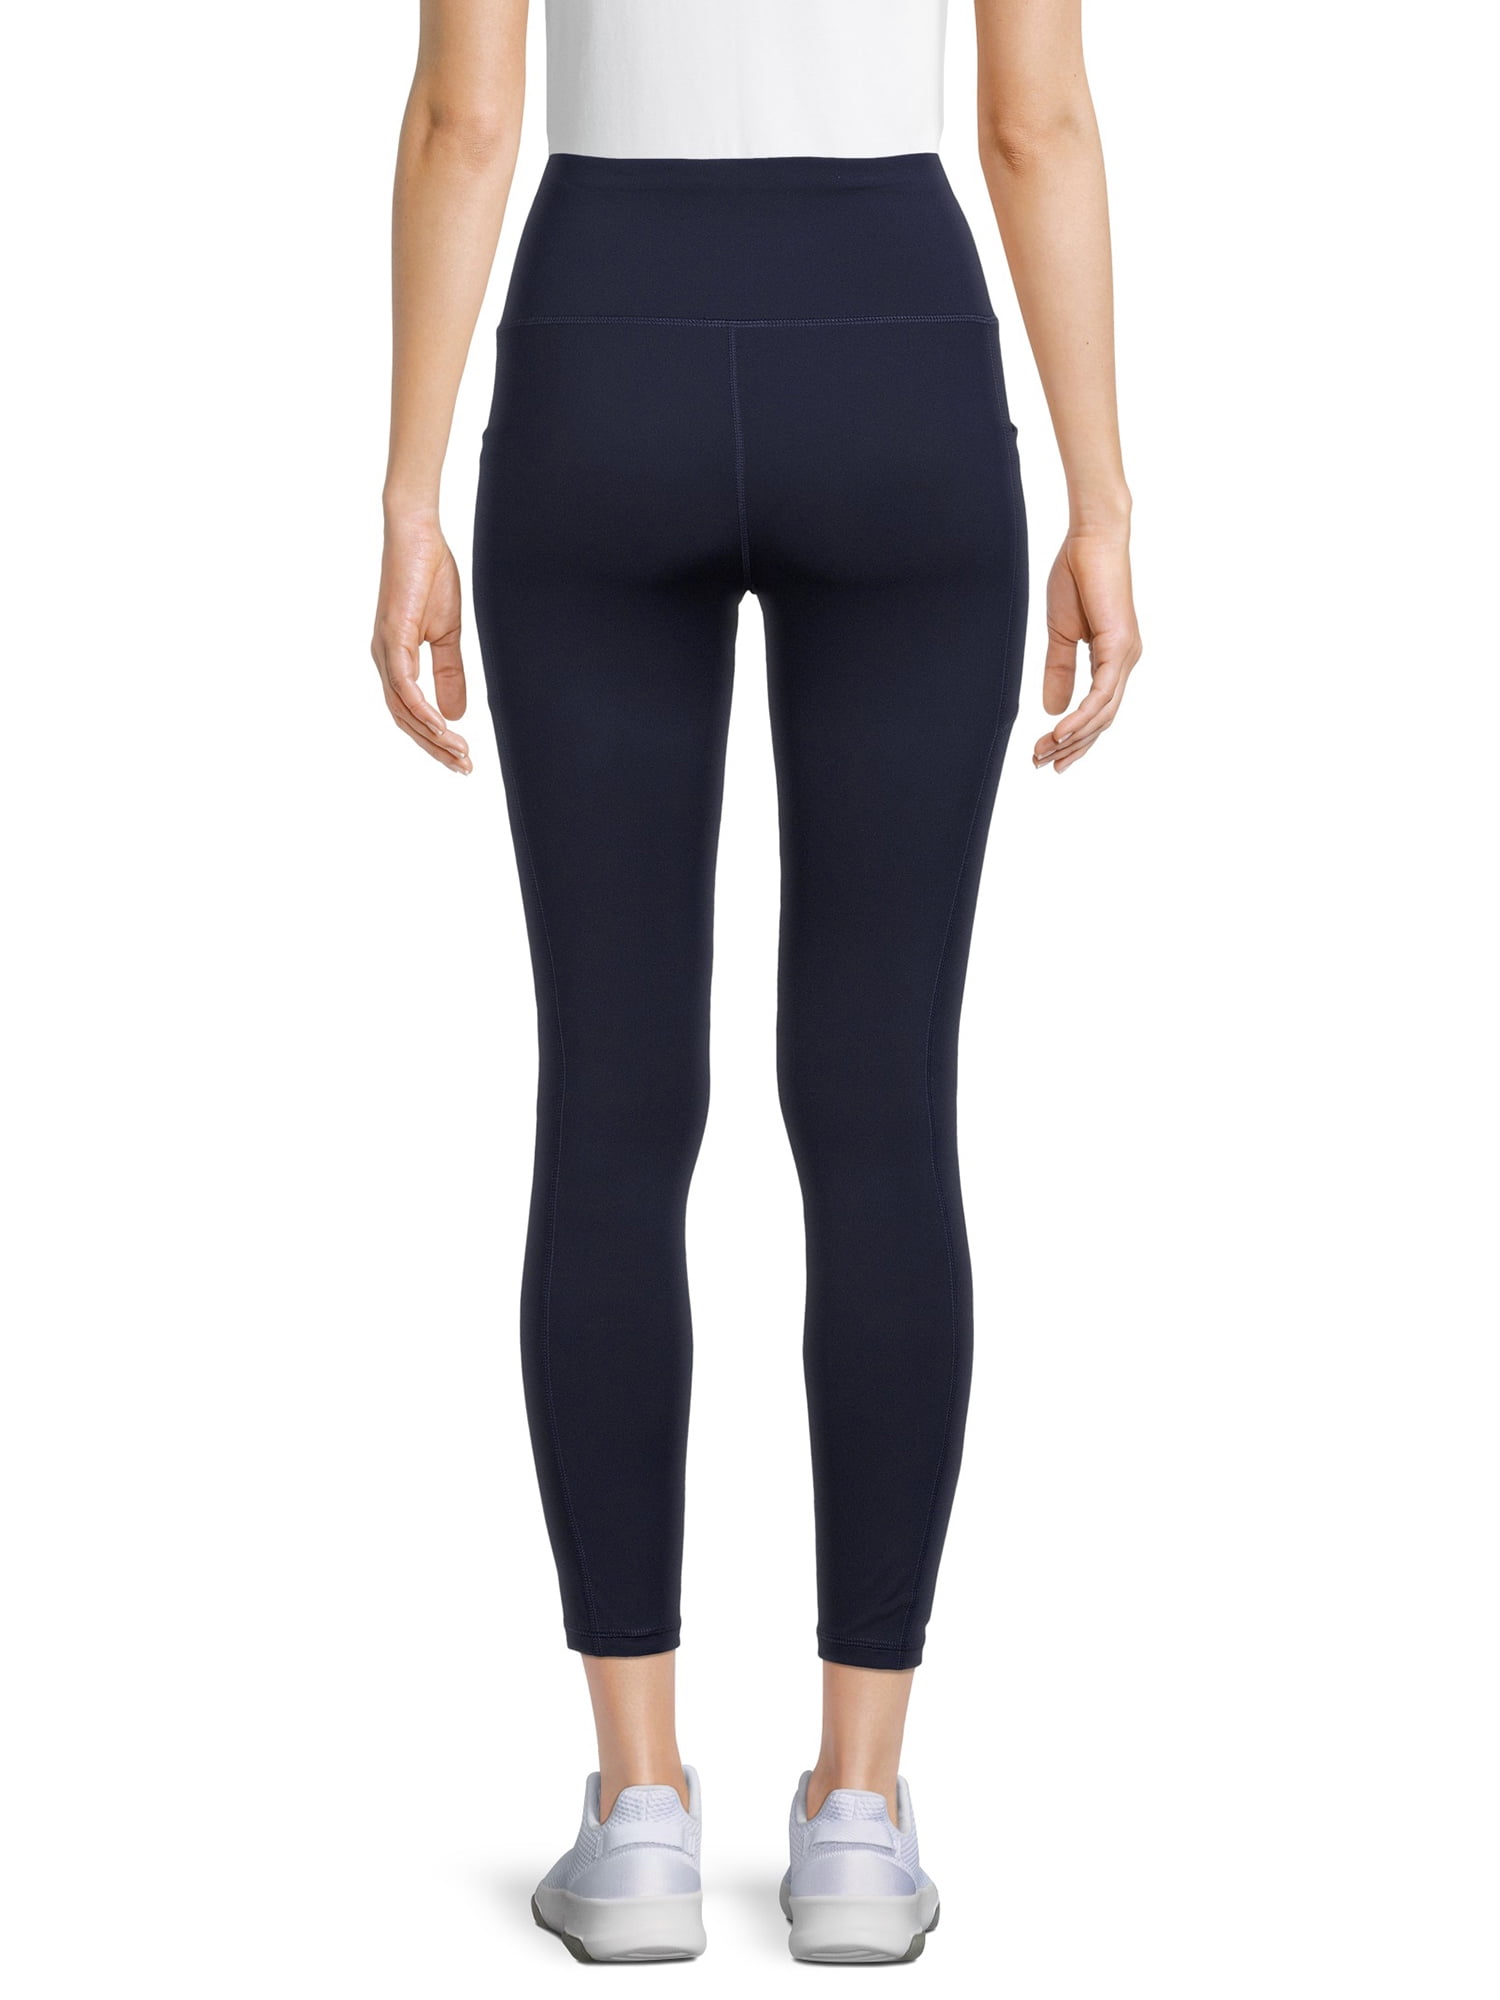 Avia XL 14/16 Cropped Pull On Athletic Leggings - Helia Beer Co